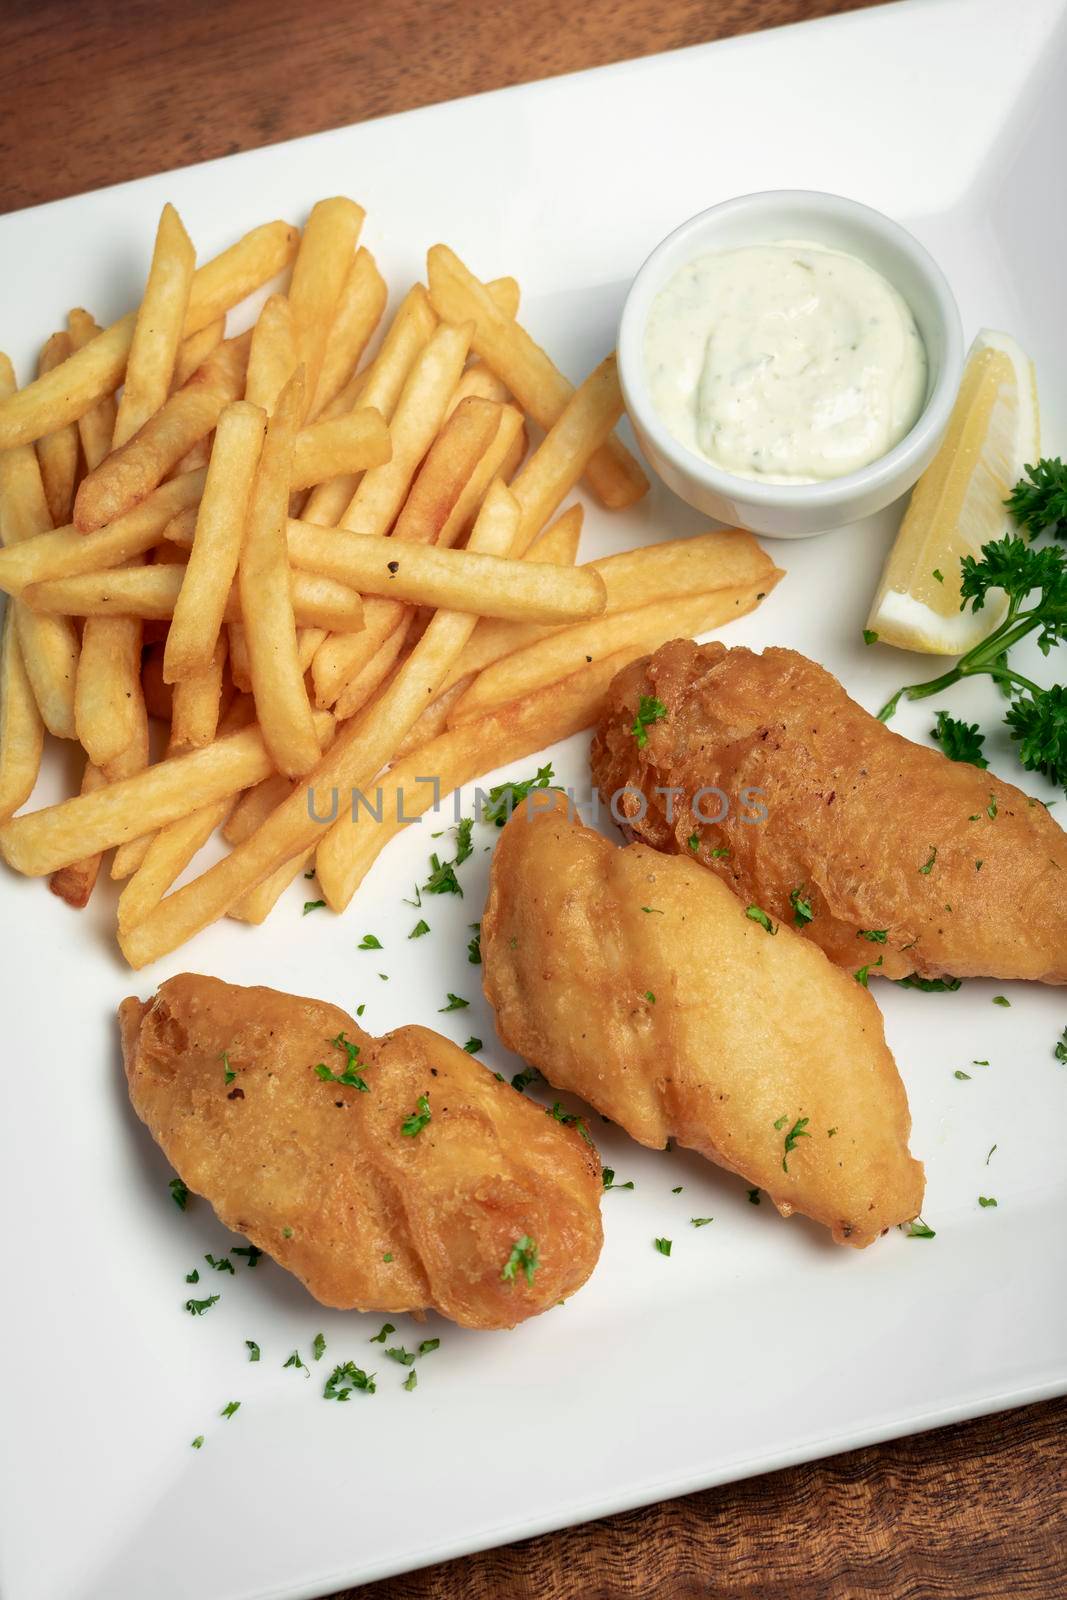 british traditional fish and chips meal on wood table